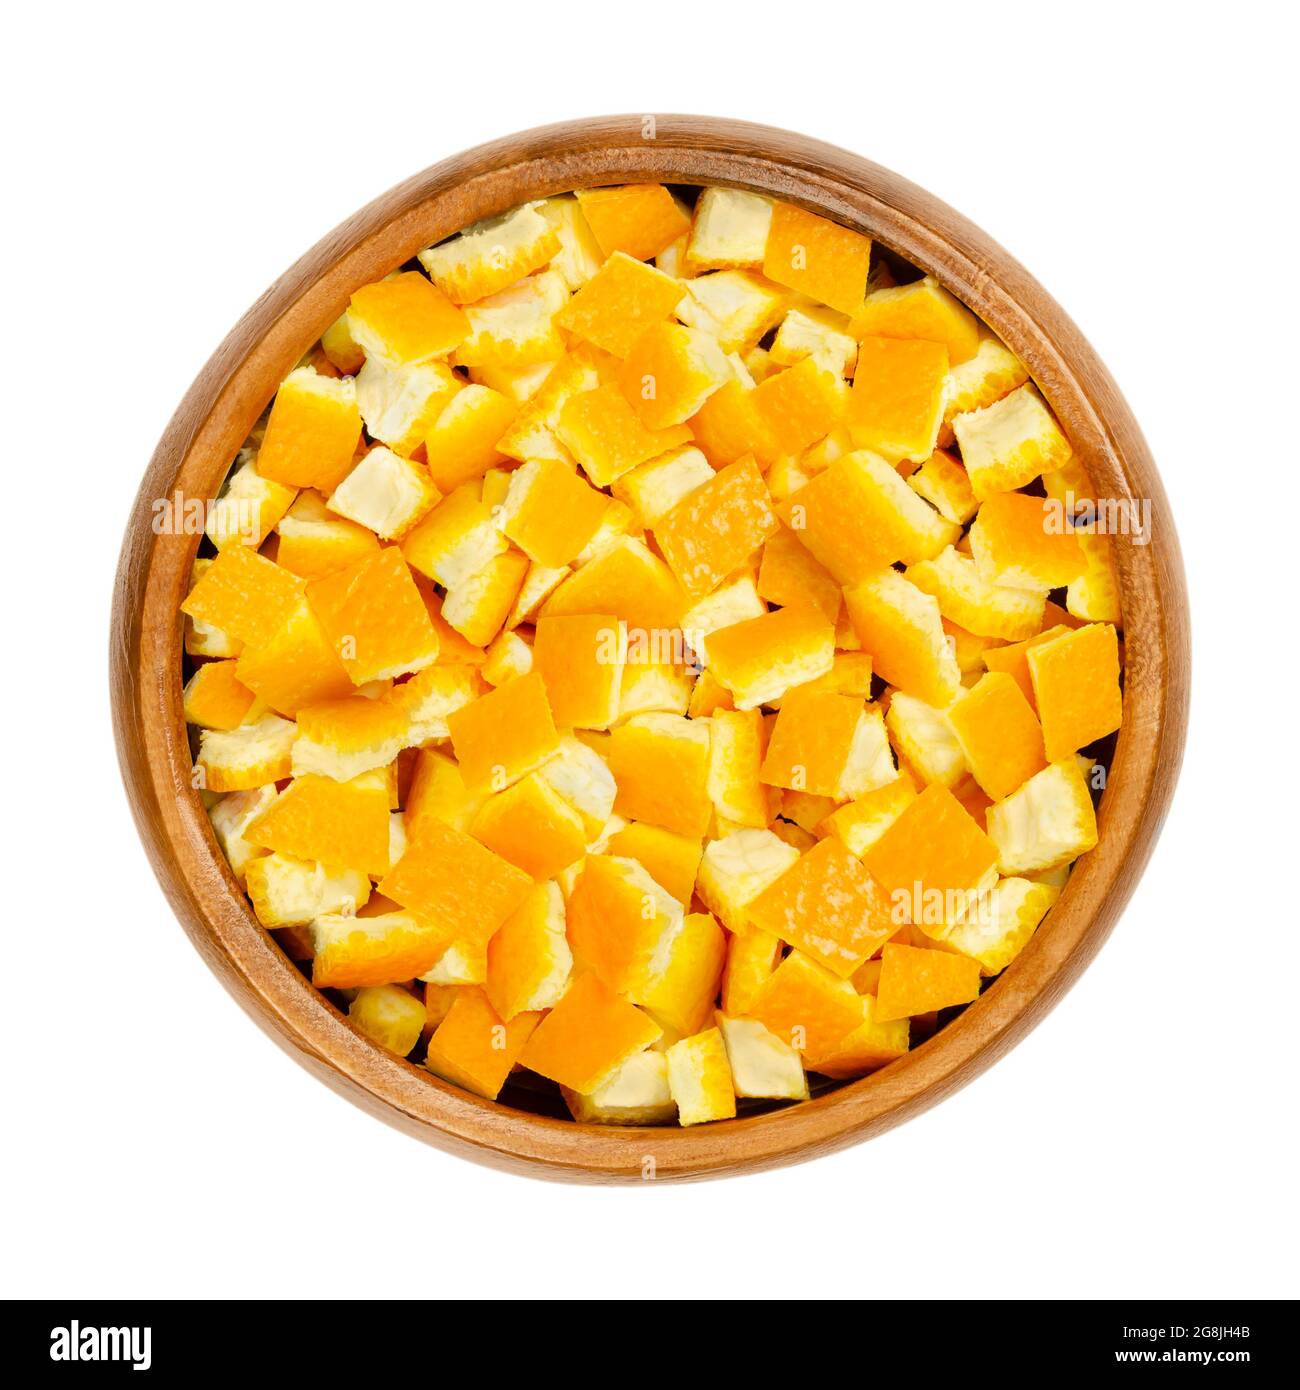 Fresh organic orange skin, cut in square shaped pieces, in a wooden bowl. Square cut skin of oranges, used for baking, or dried for tea blends. Stock Photo